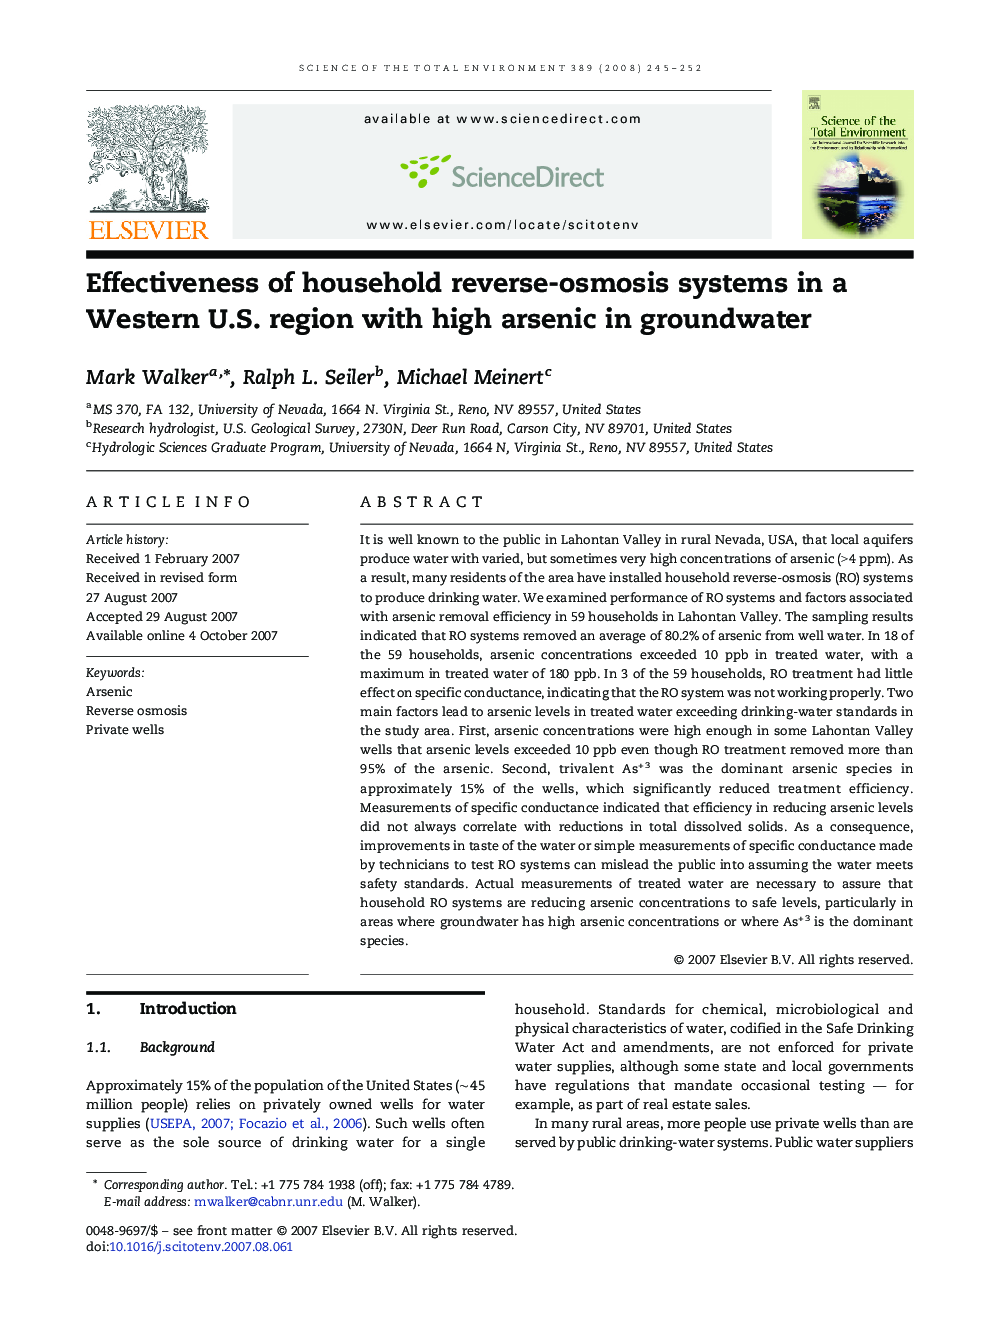 Effectiveness of household reverse-osmosis systems in a Western U.S. region with high arsenic in groundwater